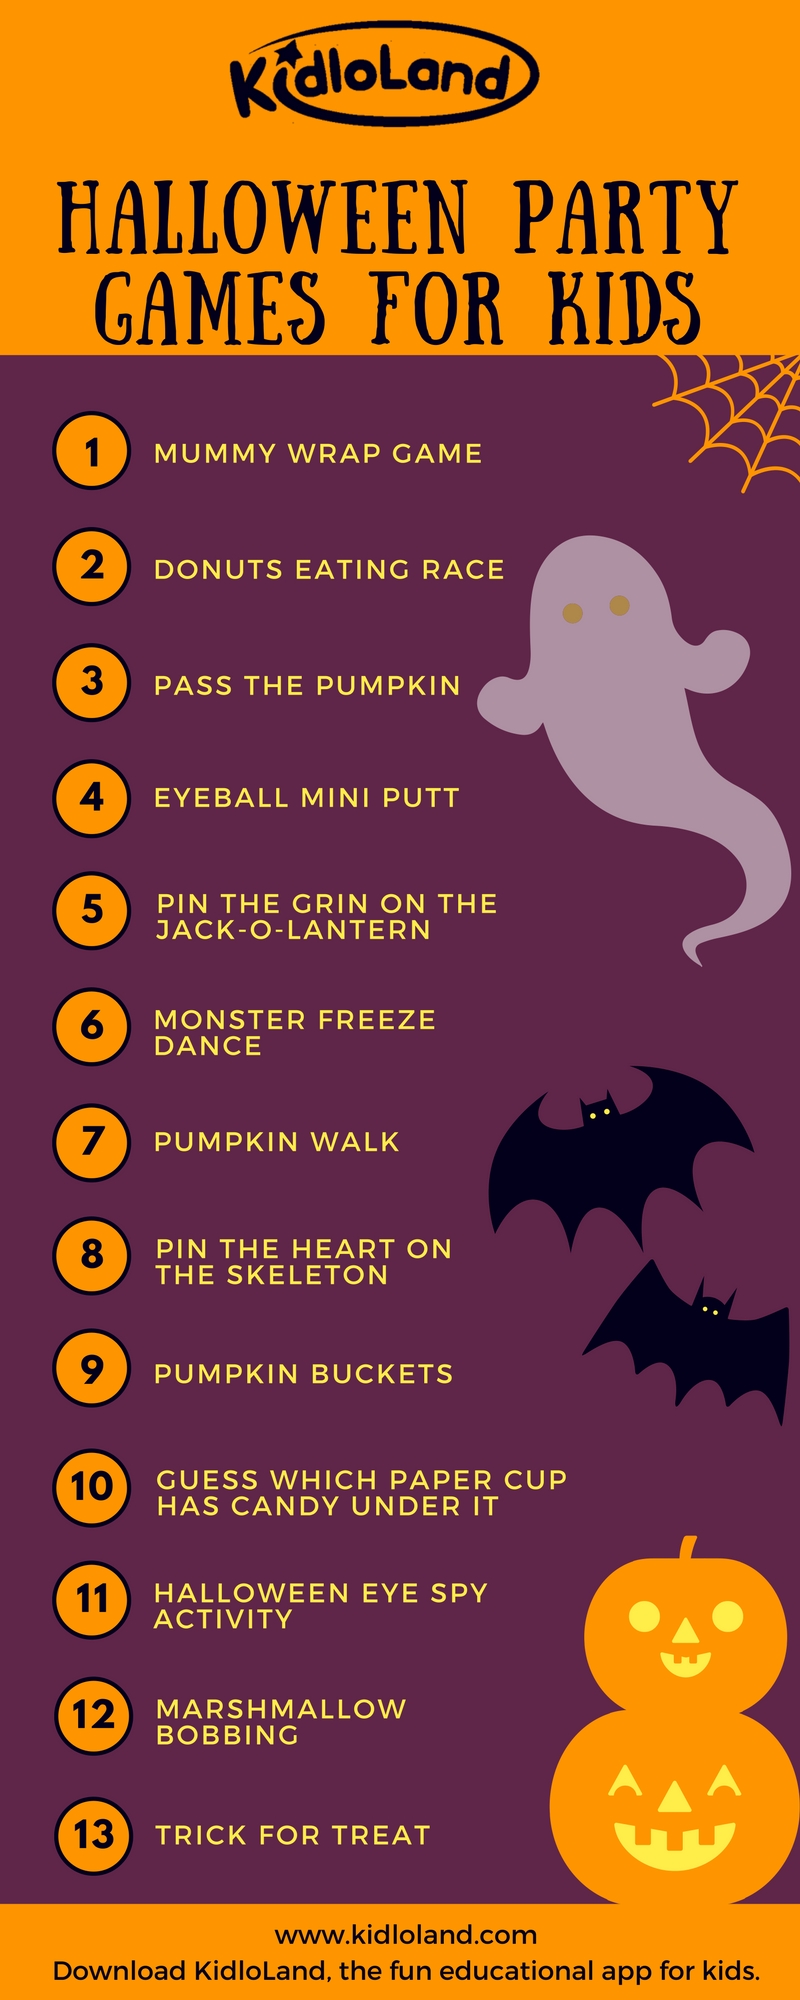 13 Fun Halloween Party Games For Kids - KidloLand